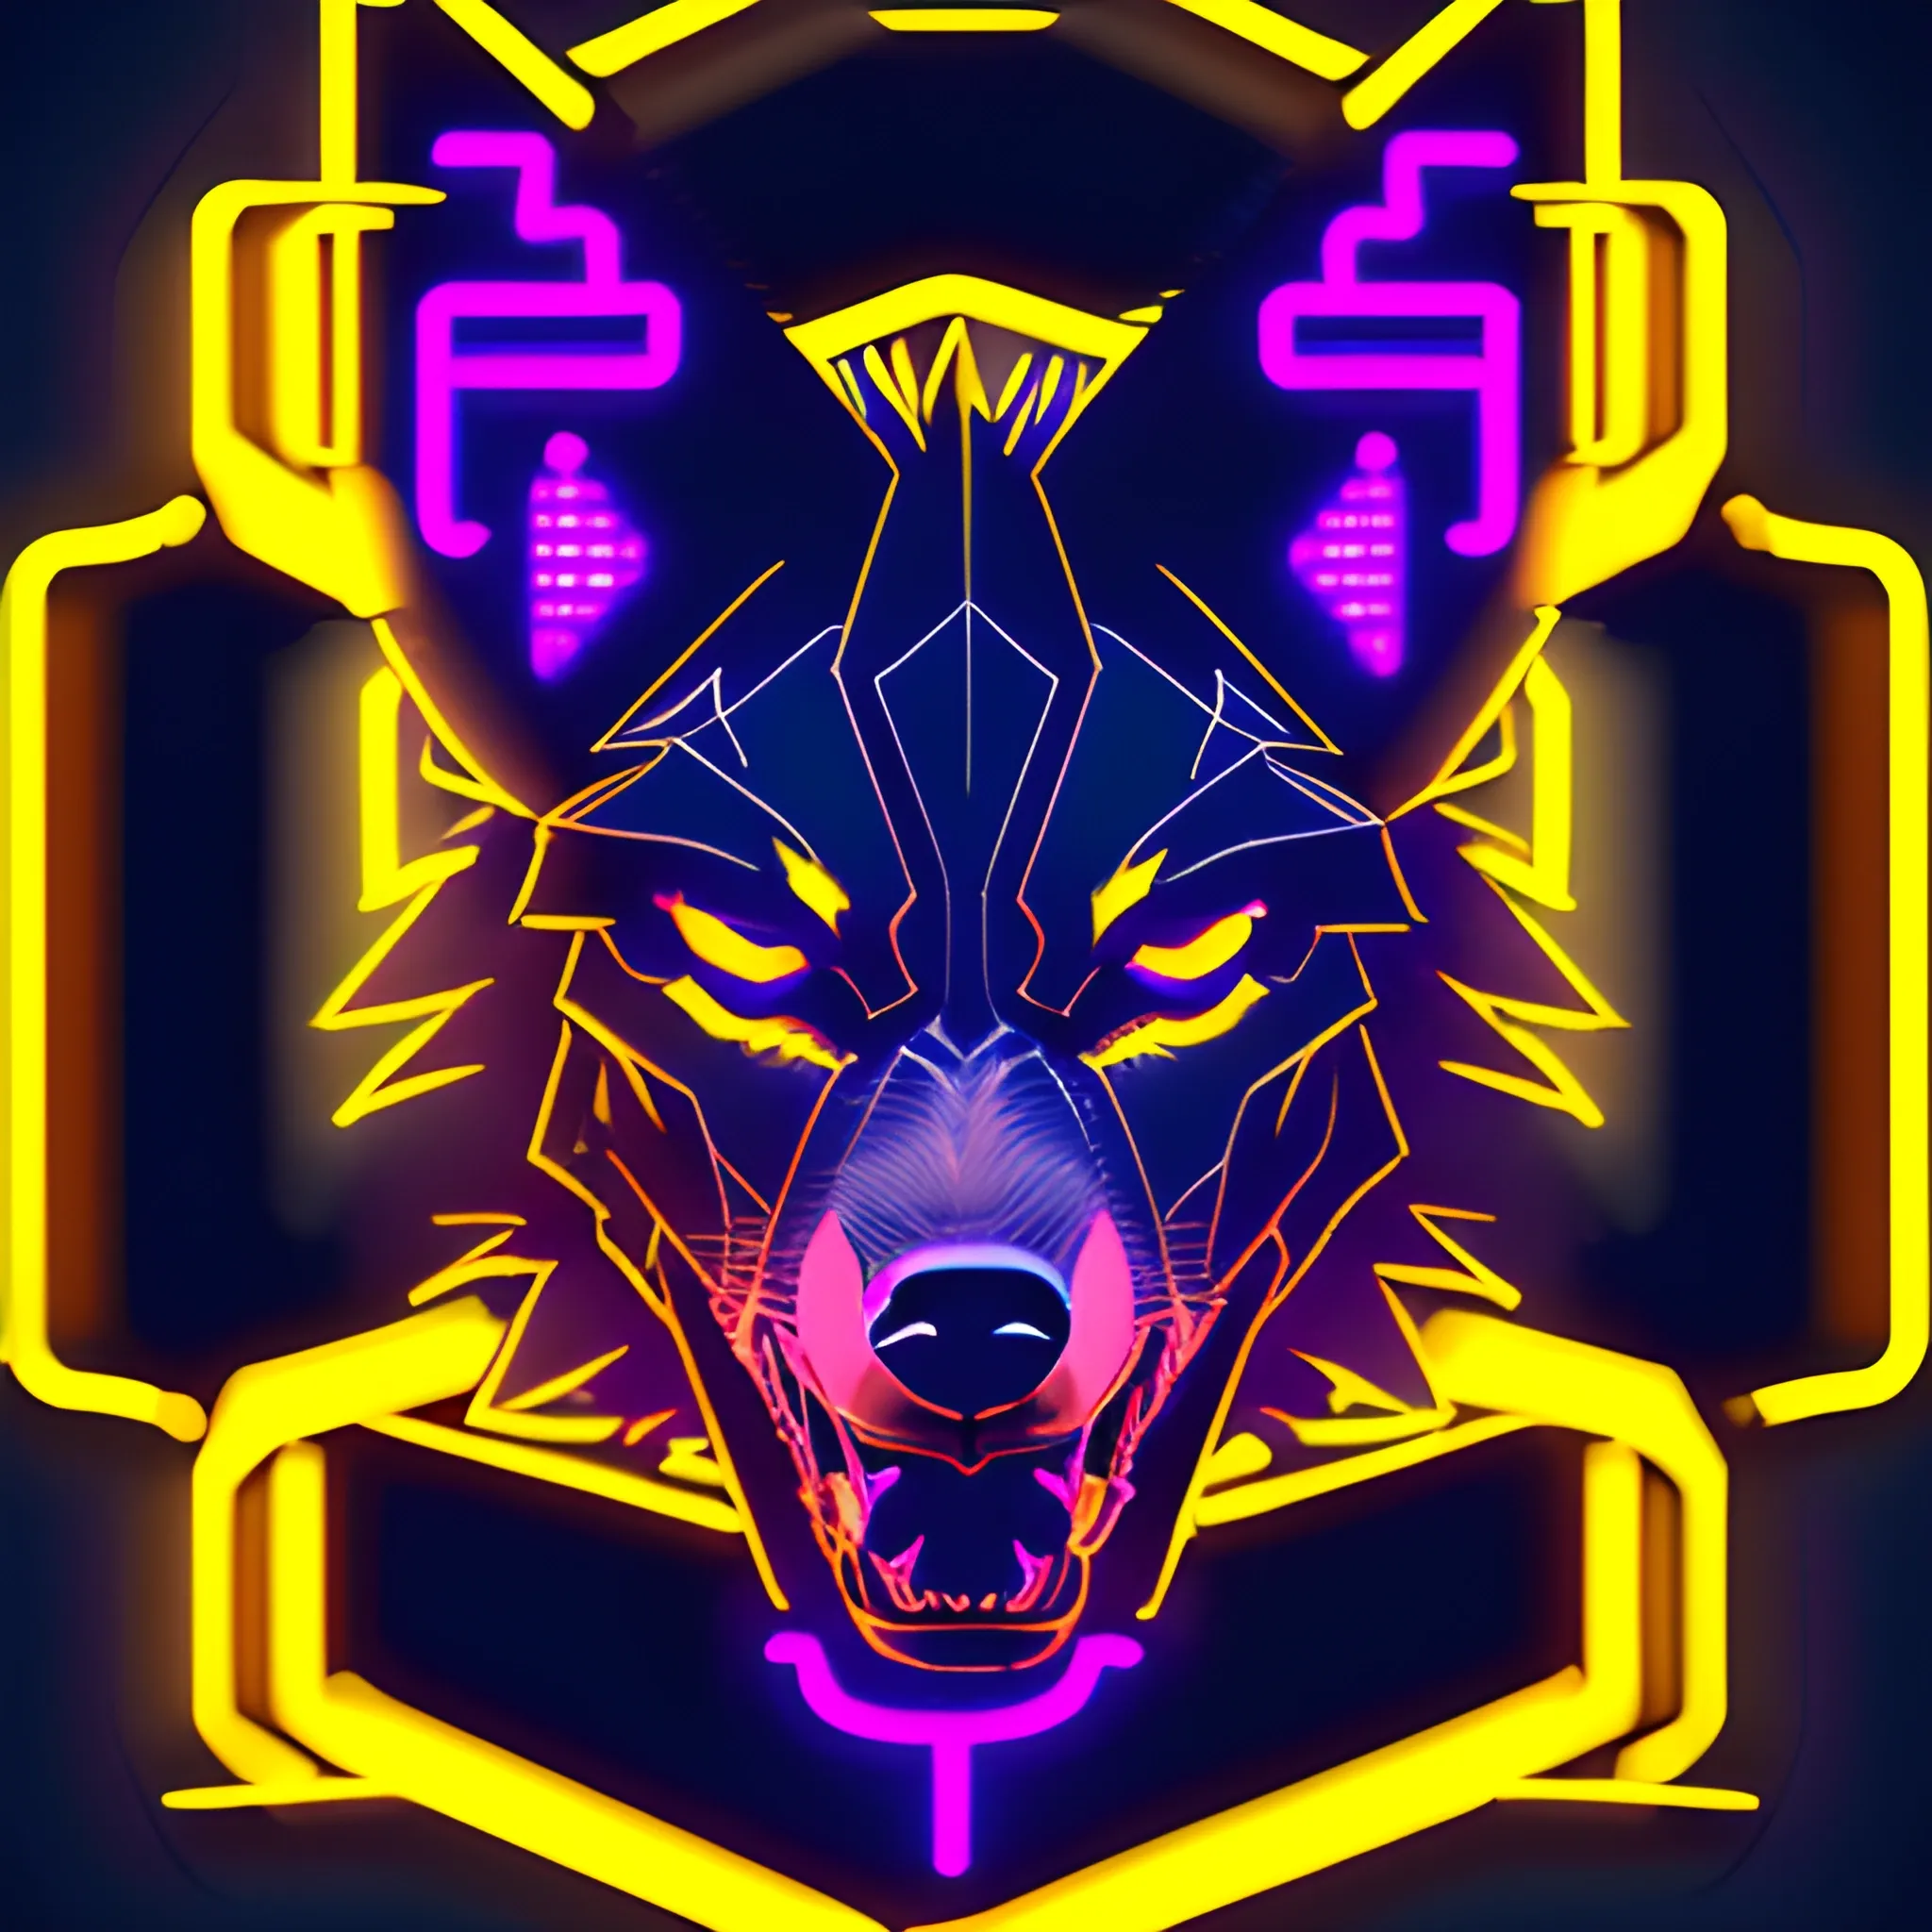 An angry cyberpunk wolf logo with the letter "A" at the background, using the yellow neon color, 3D